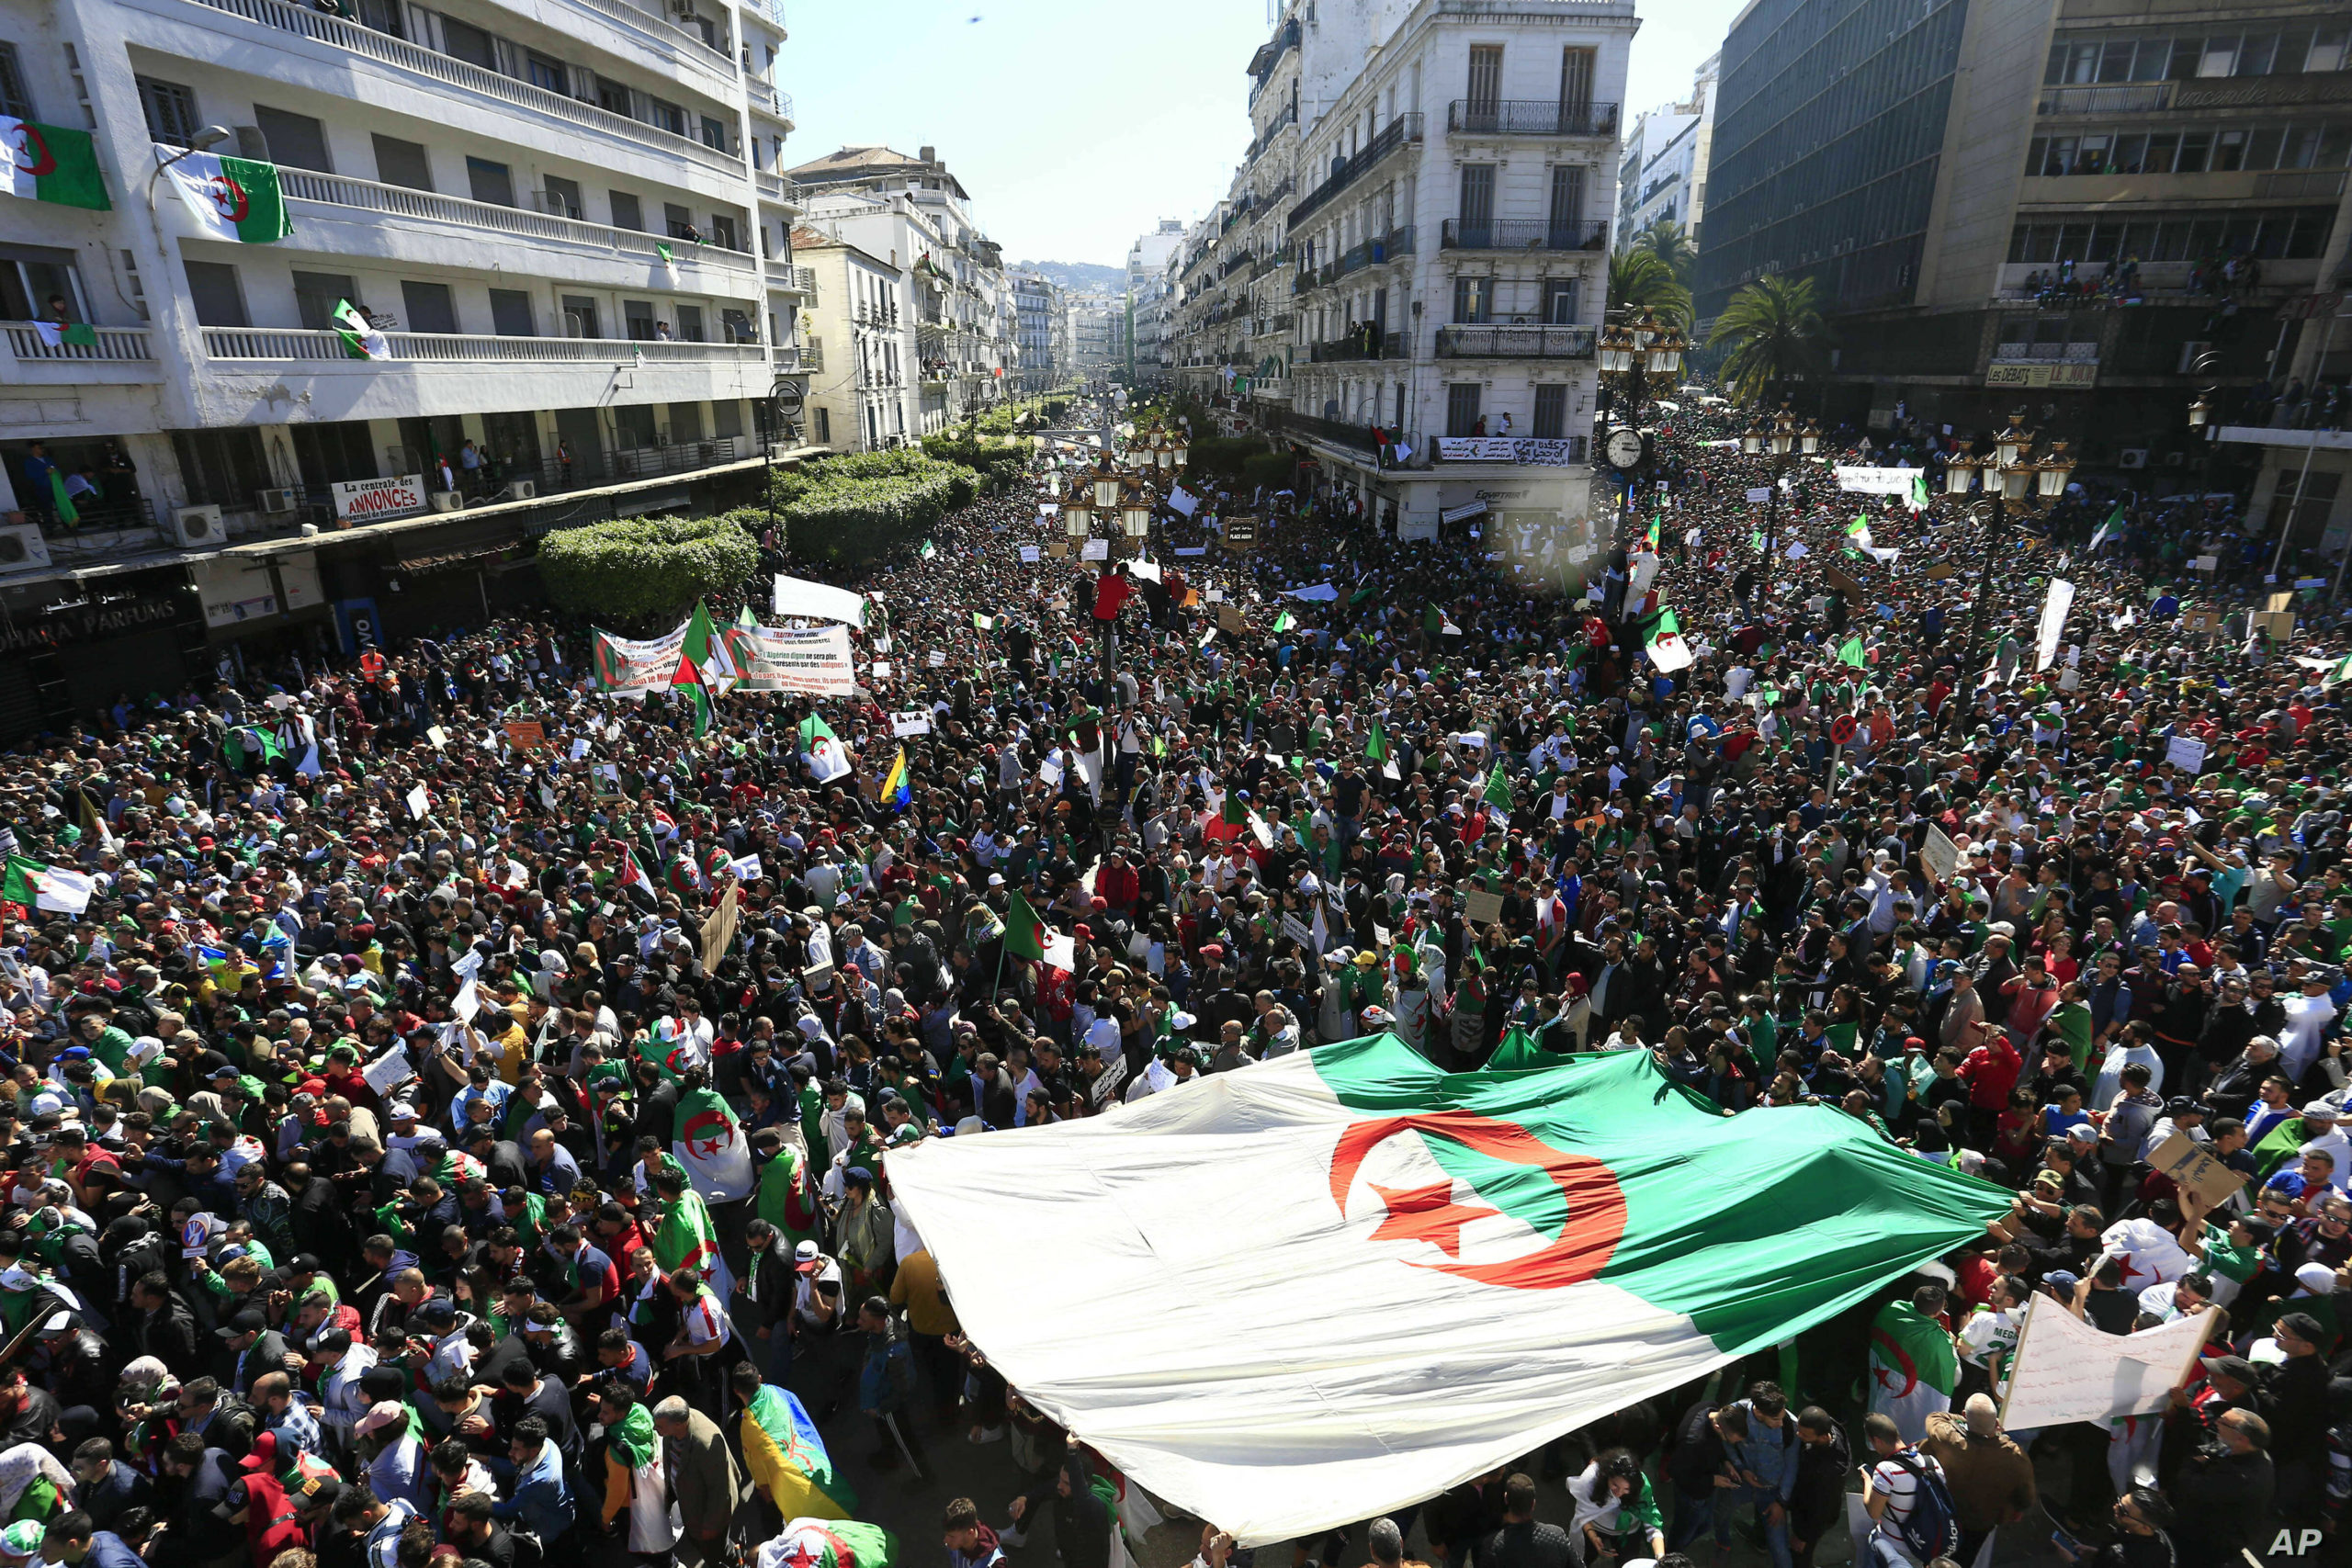 Paris-Algiers relations souring over French documentaries on “Hirak”